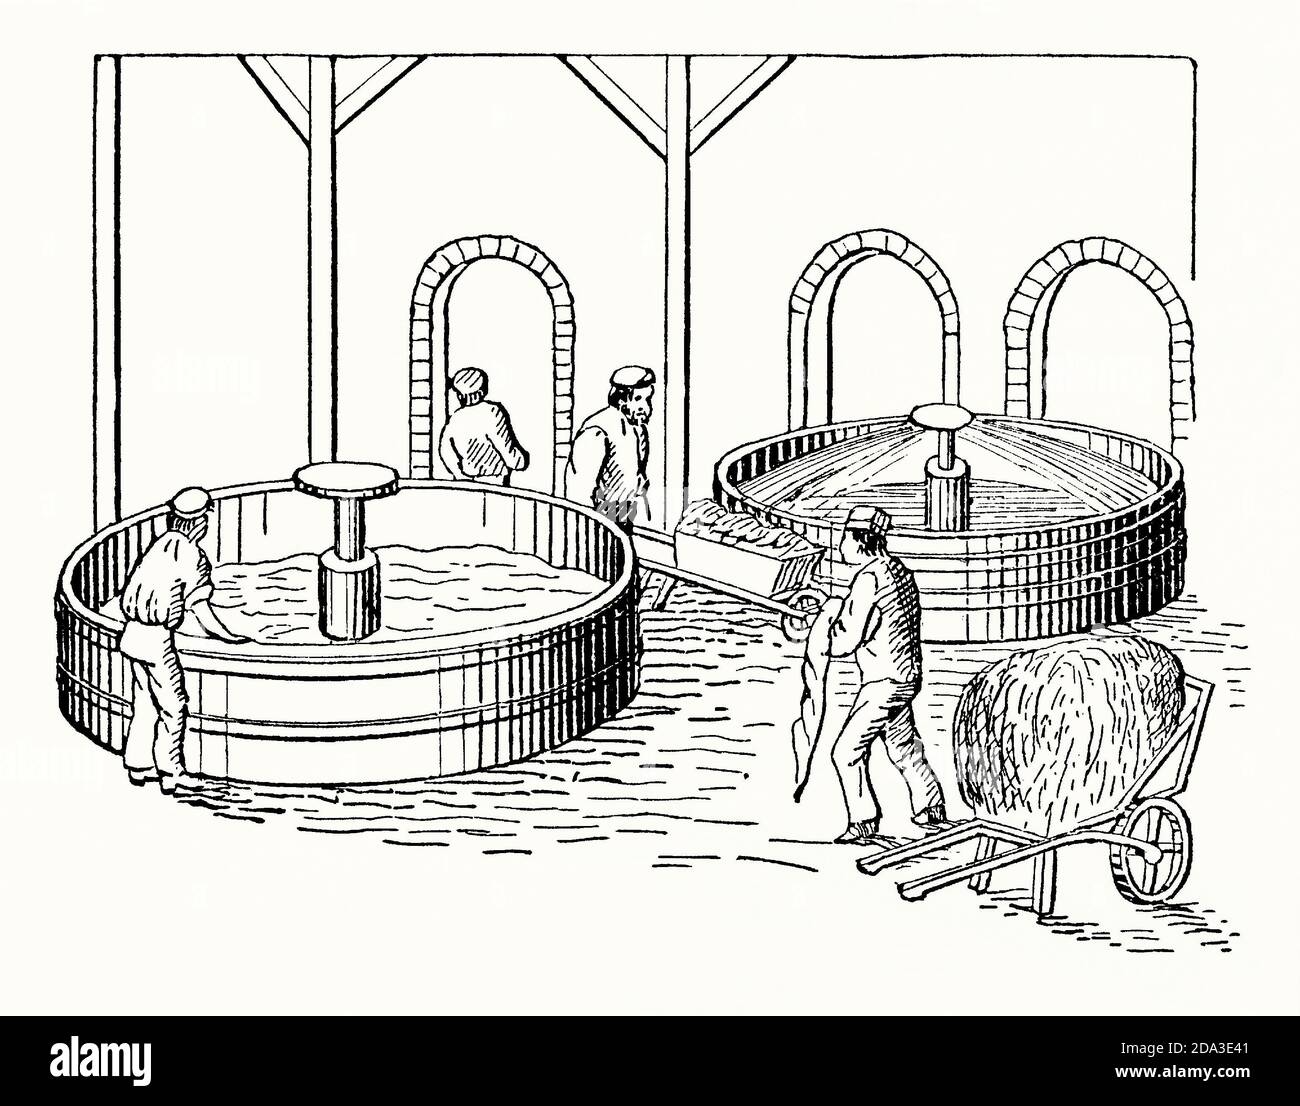 An old engraving of keir bleaching (or bucking) in cotton and linen fabric production in the 1800s. It is from a Victorian mechanical engineering book of the 1880s. A kier (or keeve) is a large circular boiler or vat used in bleaching and cleaning the fabric. These were continuously rotated by an engine and a constant stream of hot water was sprayed from above. The fabric was mixed with water and lime – which assisted in removing dirt and grease. The process was also used for processing paper pulp. Stock Photo